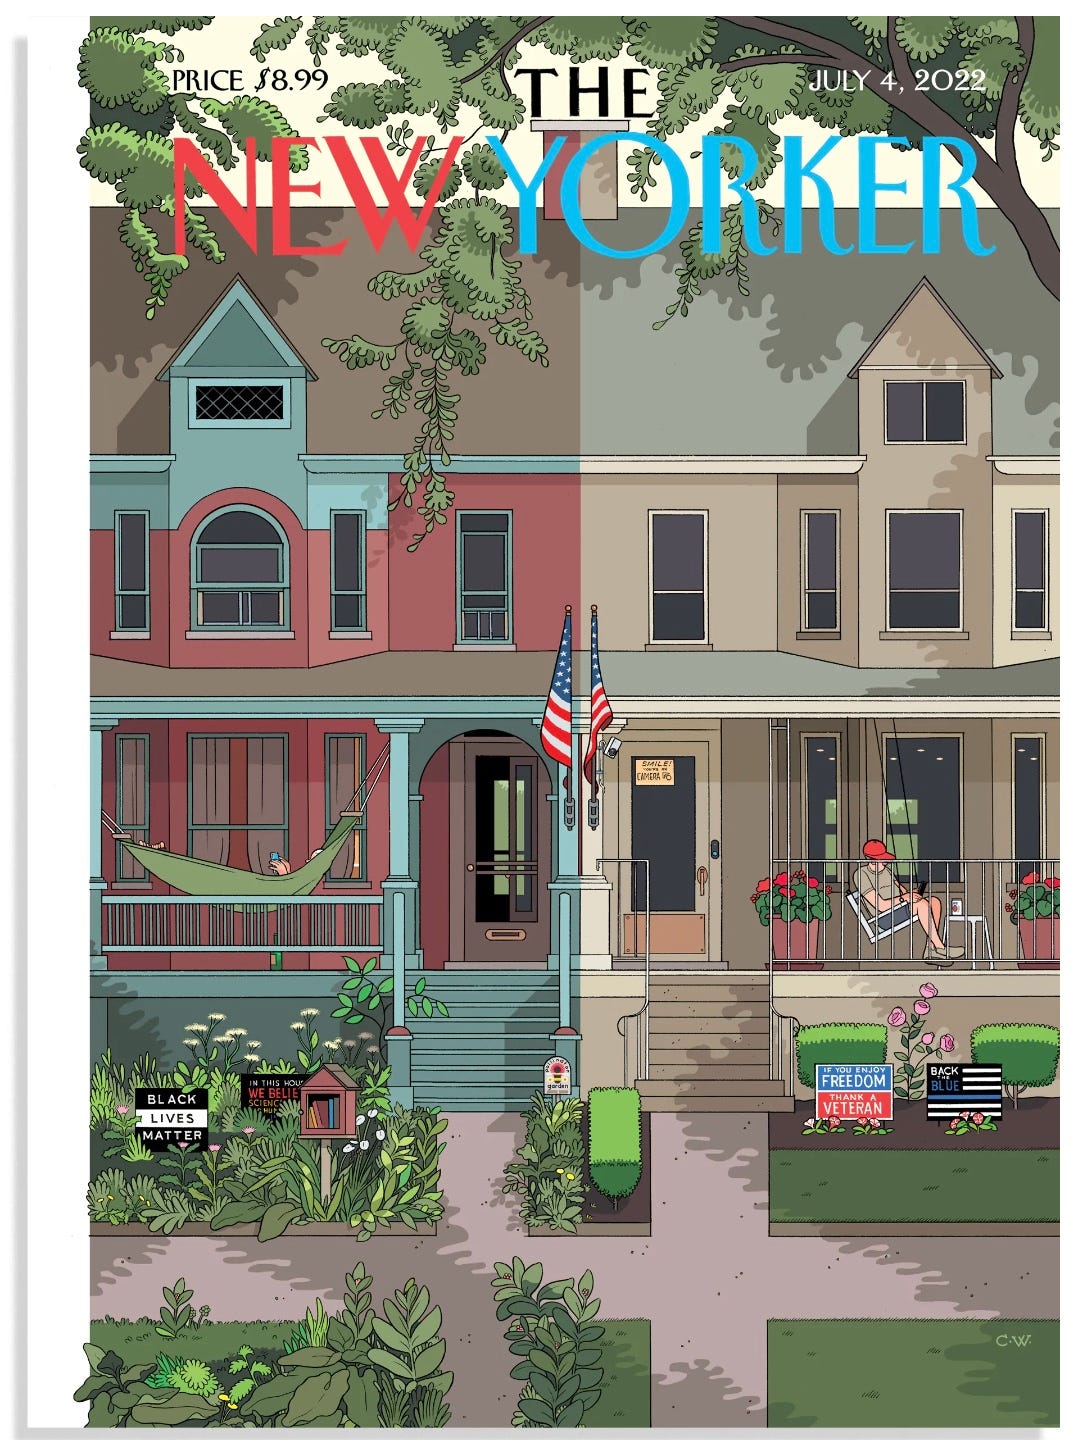 Cover of this week's New Yorker: Stereotypical liberal household on the left, stereotypical conservative on the right